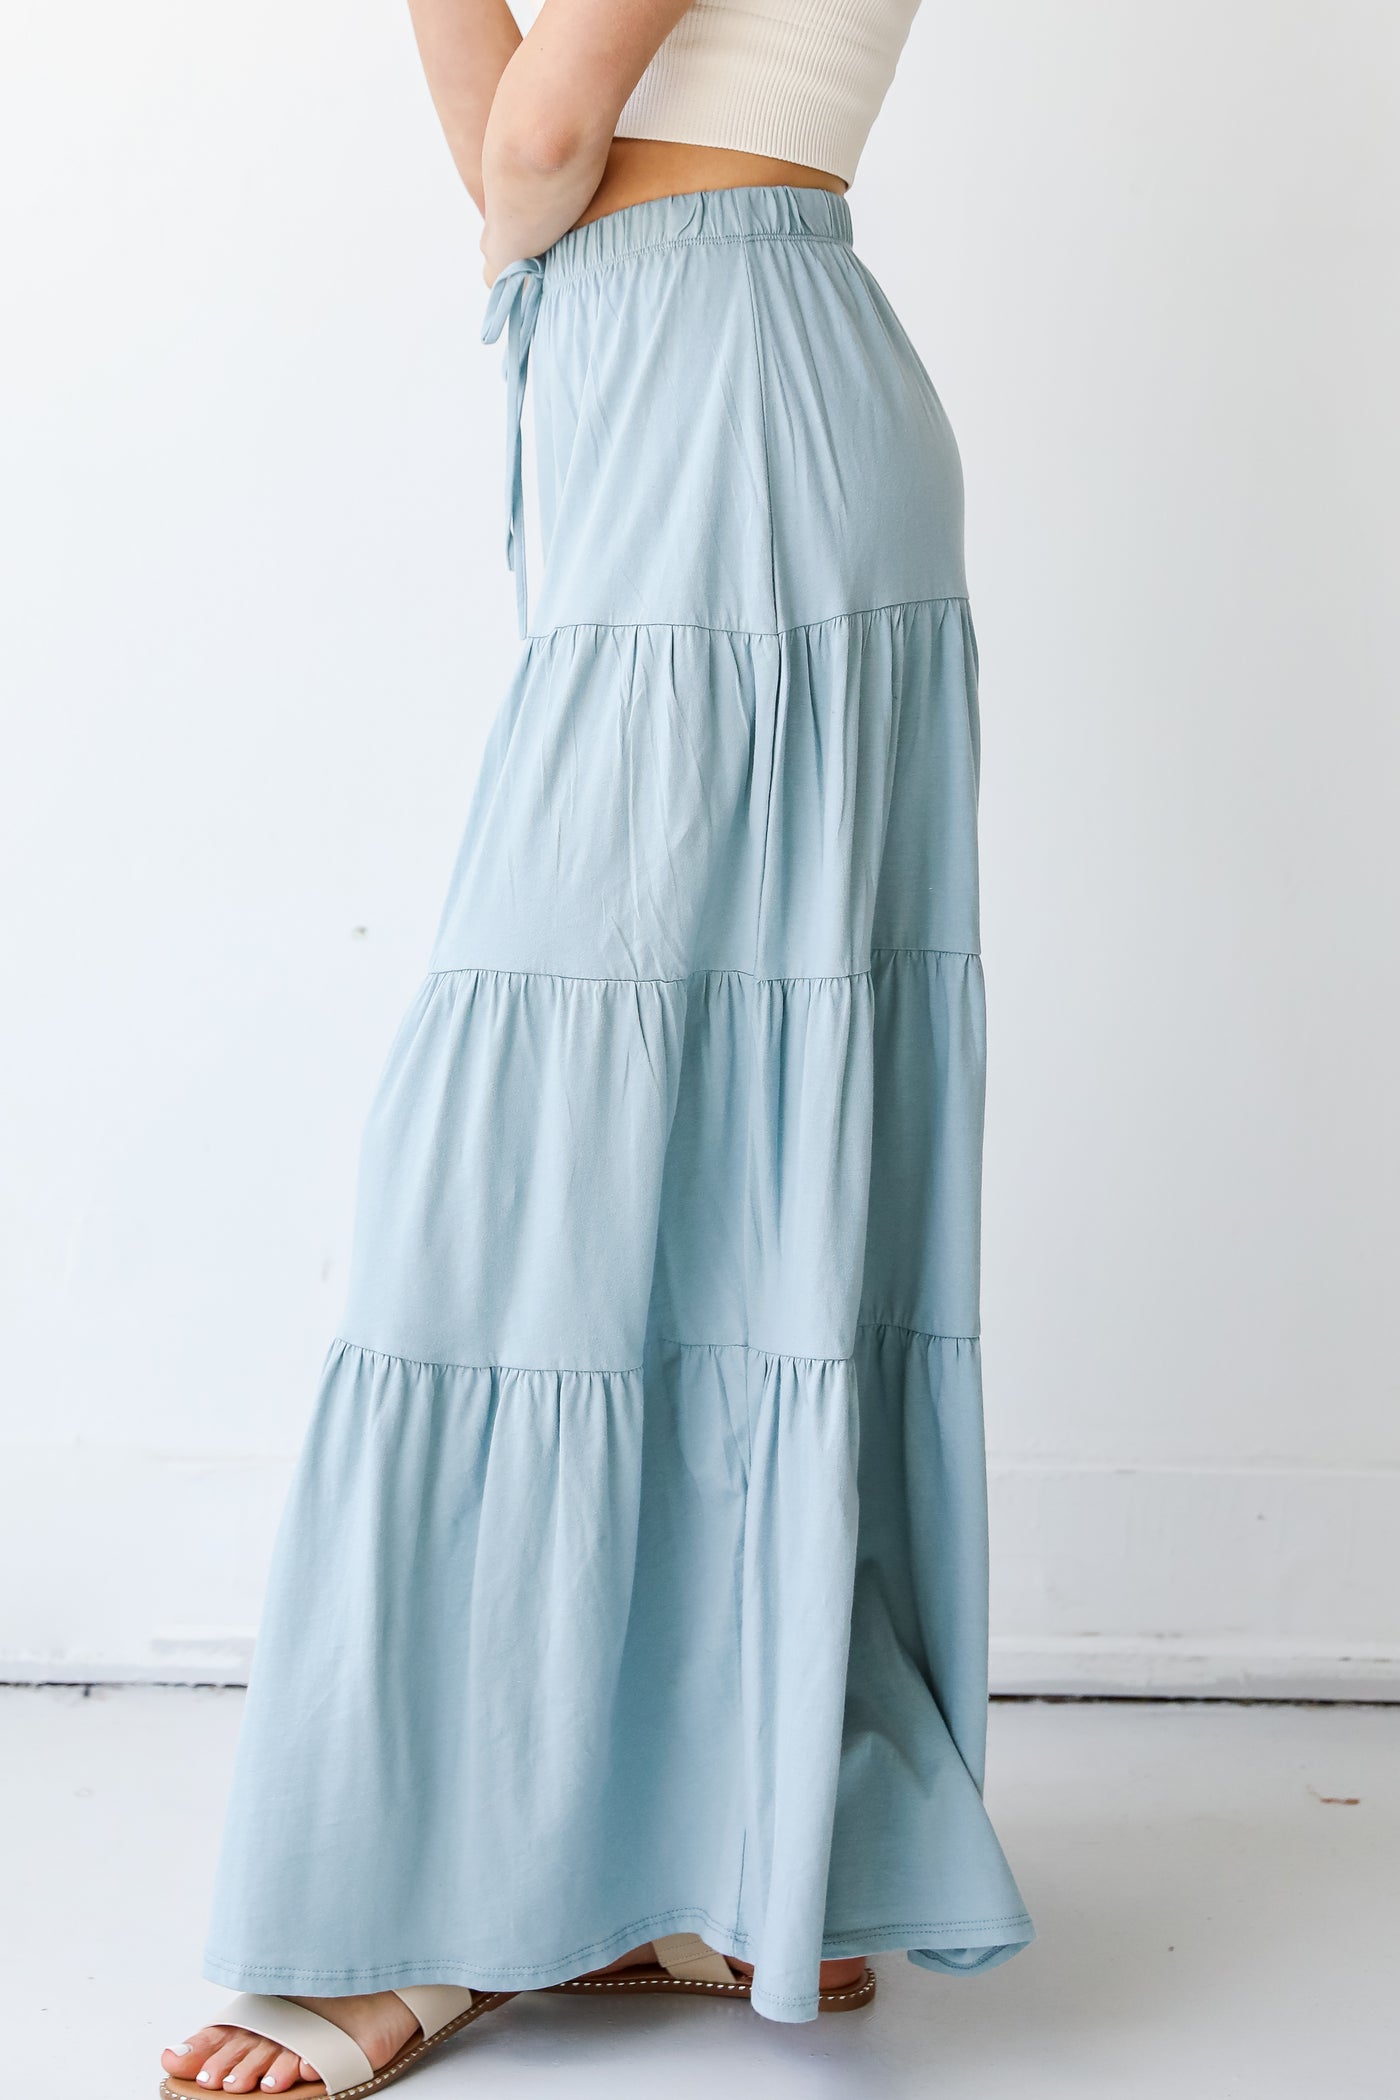 Tiered Maxi Skirt in denim side view